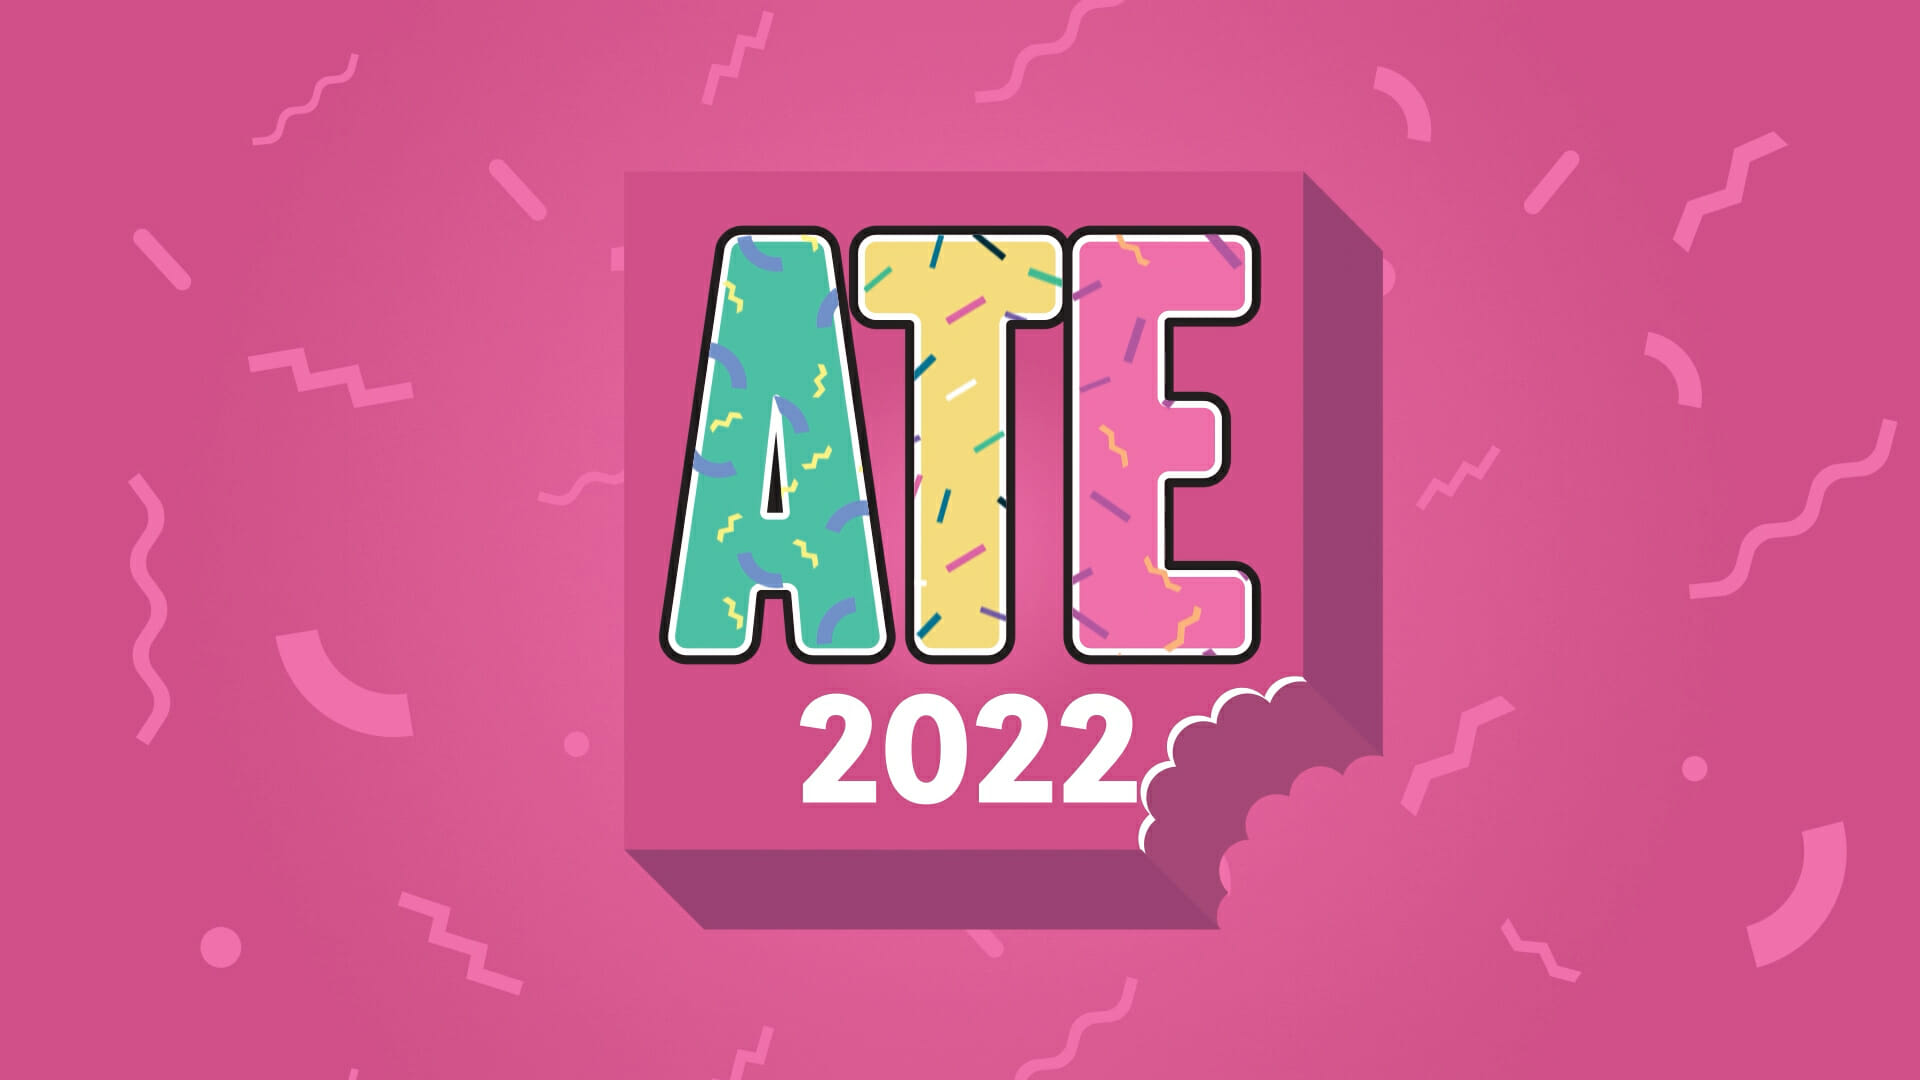 Branding for Toon Boom ATE 2022. The text is covered in sprinkles and looks delicious.